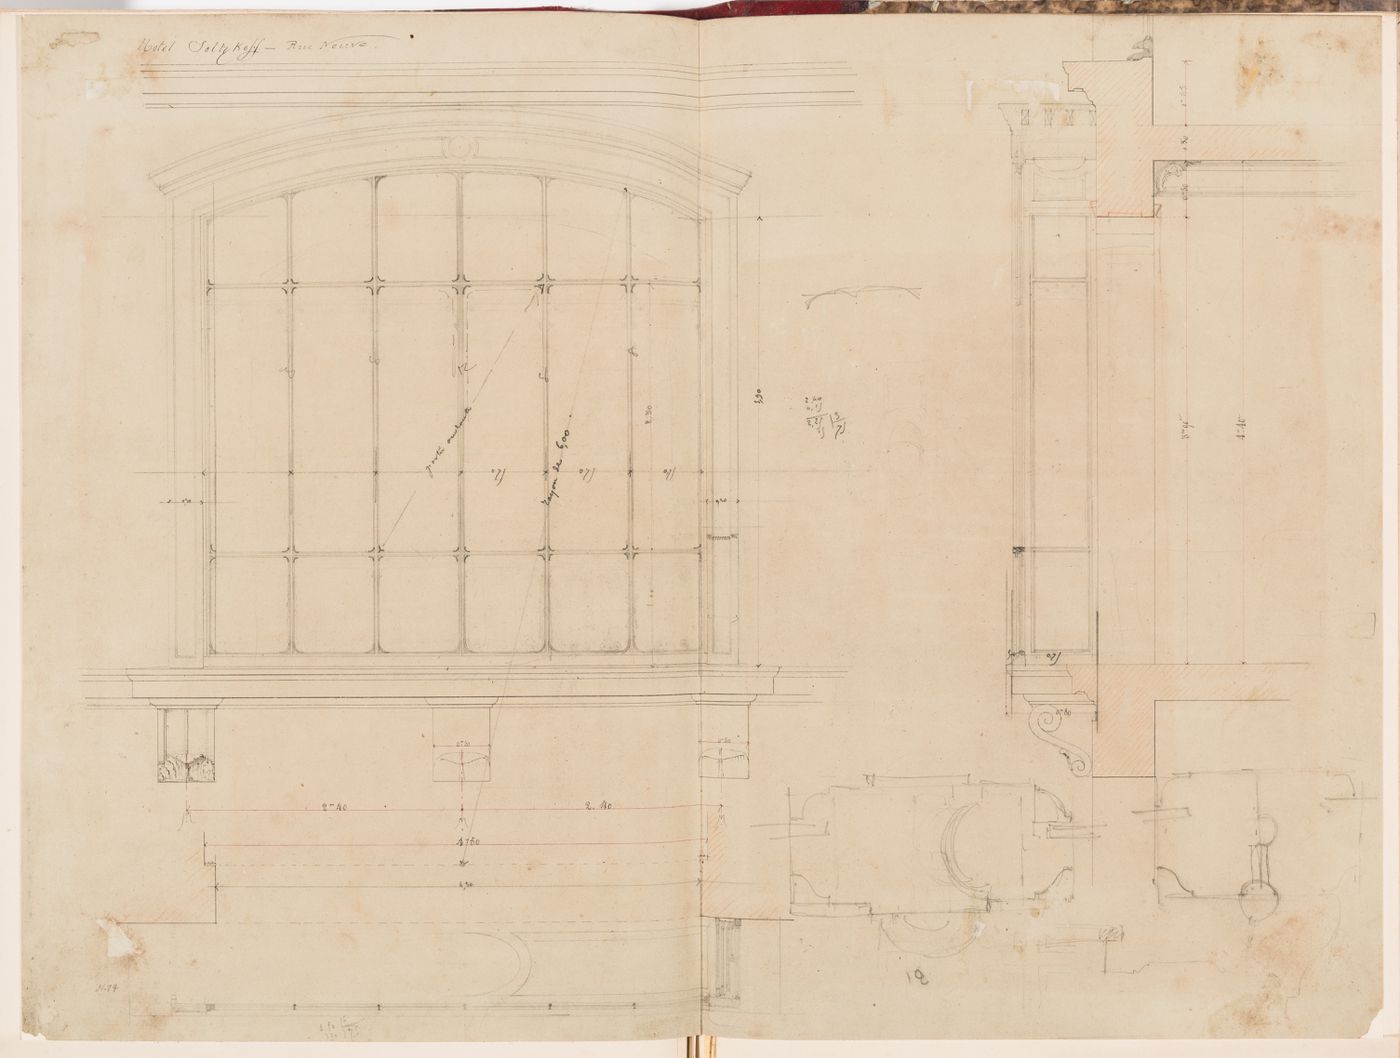 Elevation, plan, section and sketches for joinery details for the centre window on the first floor of the courtyard façade, Hôtel Soltykoff